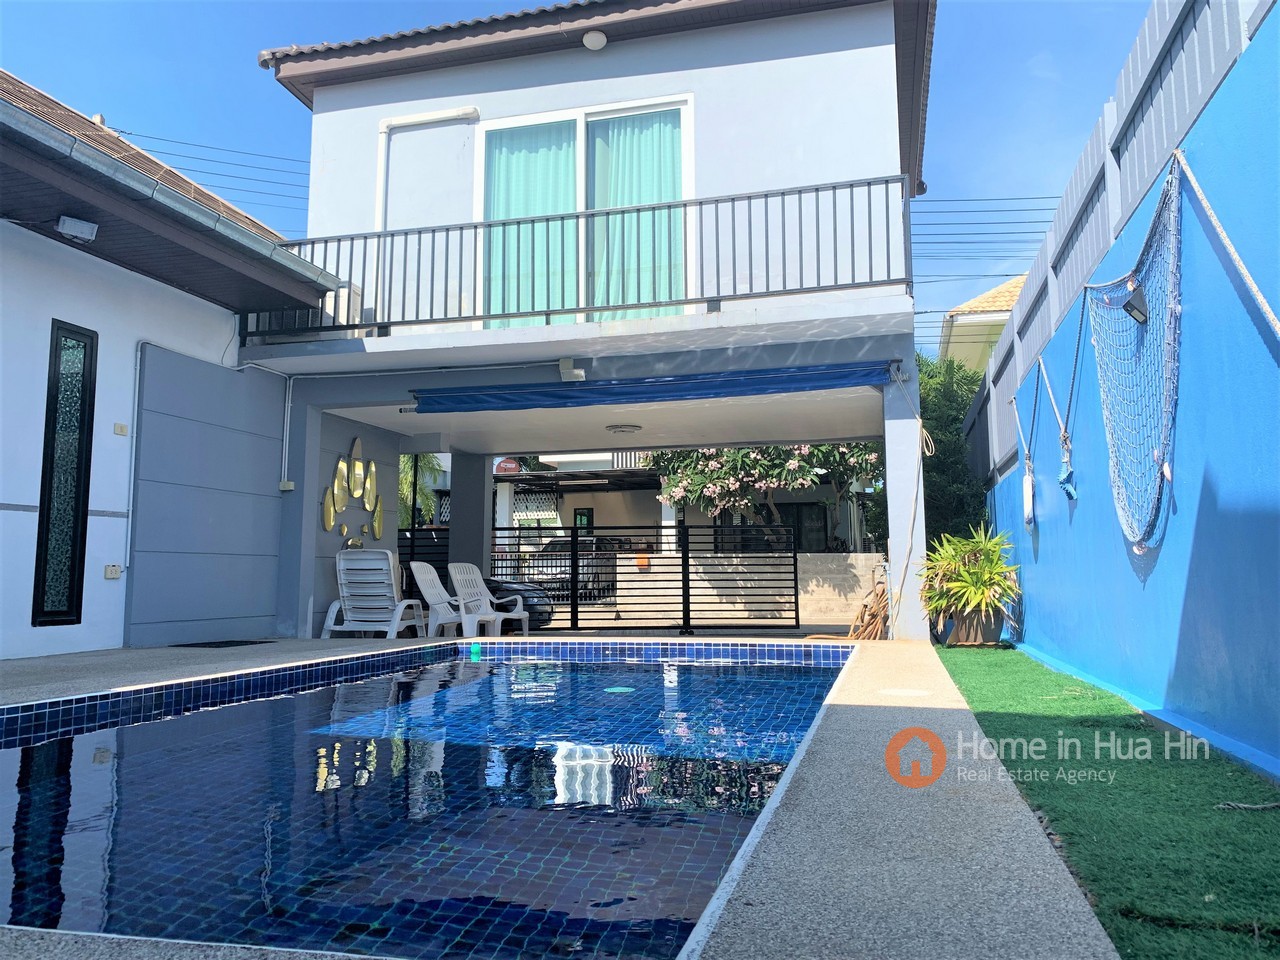 3 Bedrooms House for Sale in Hua Hin soi 102